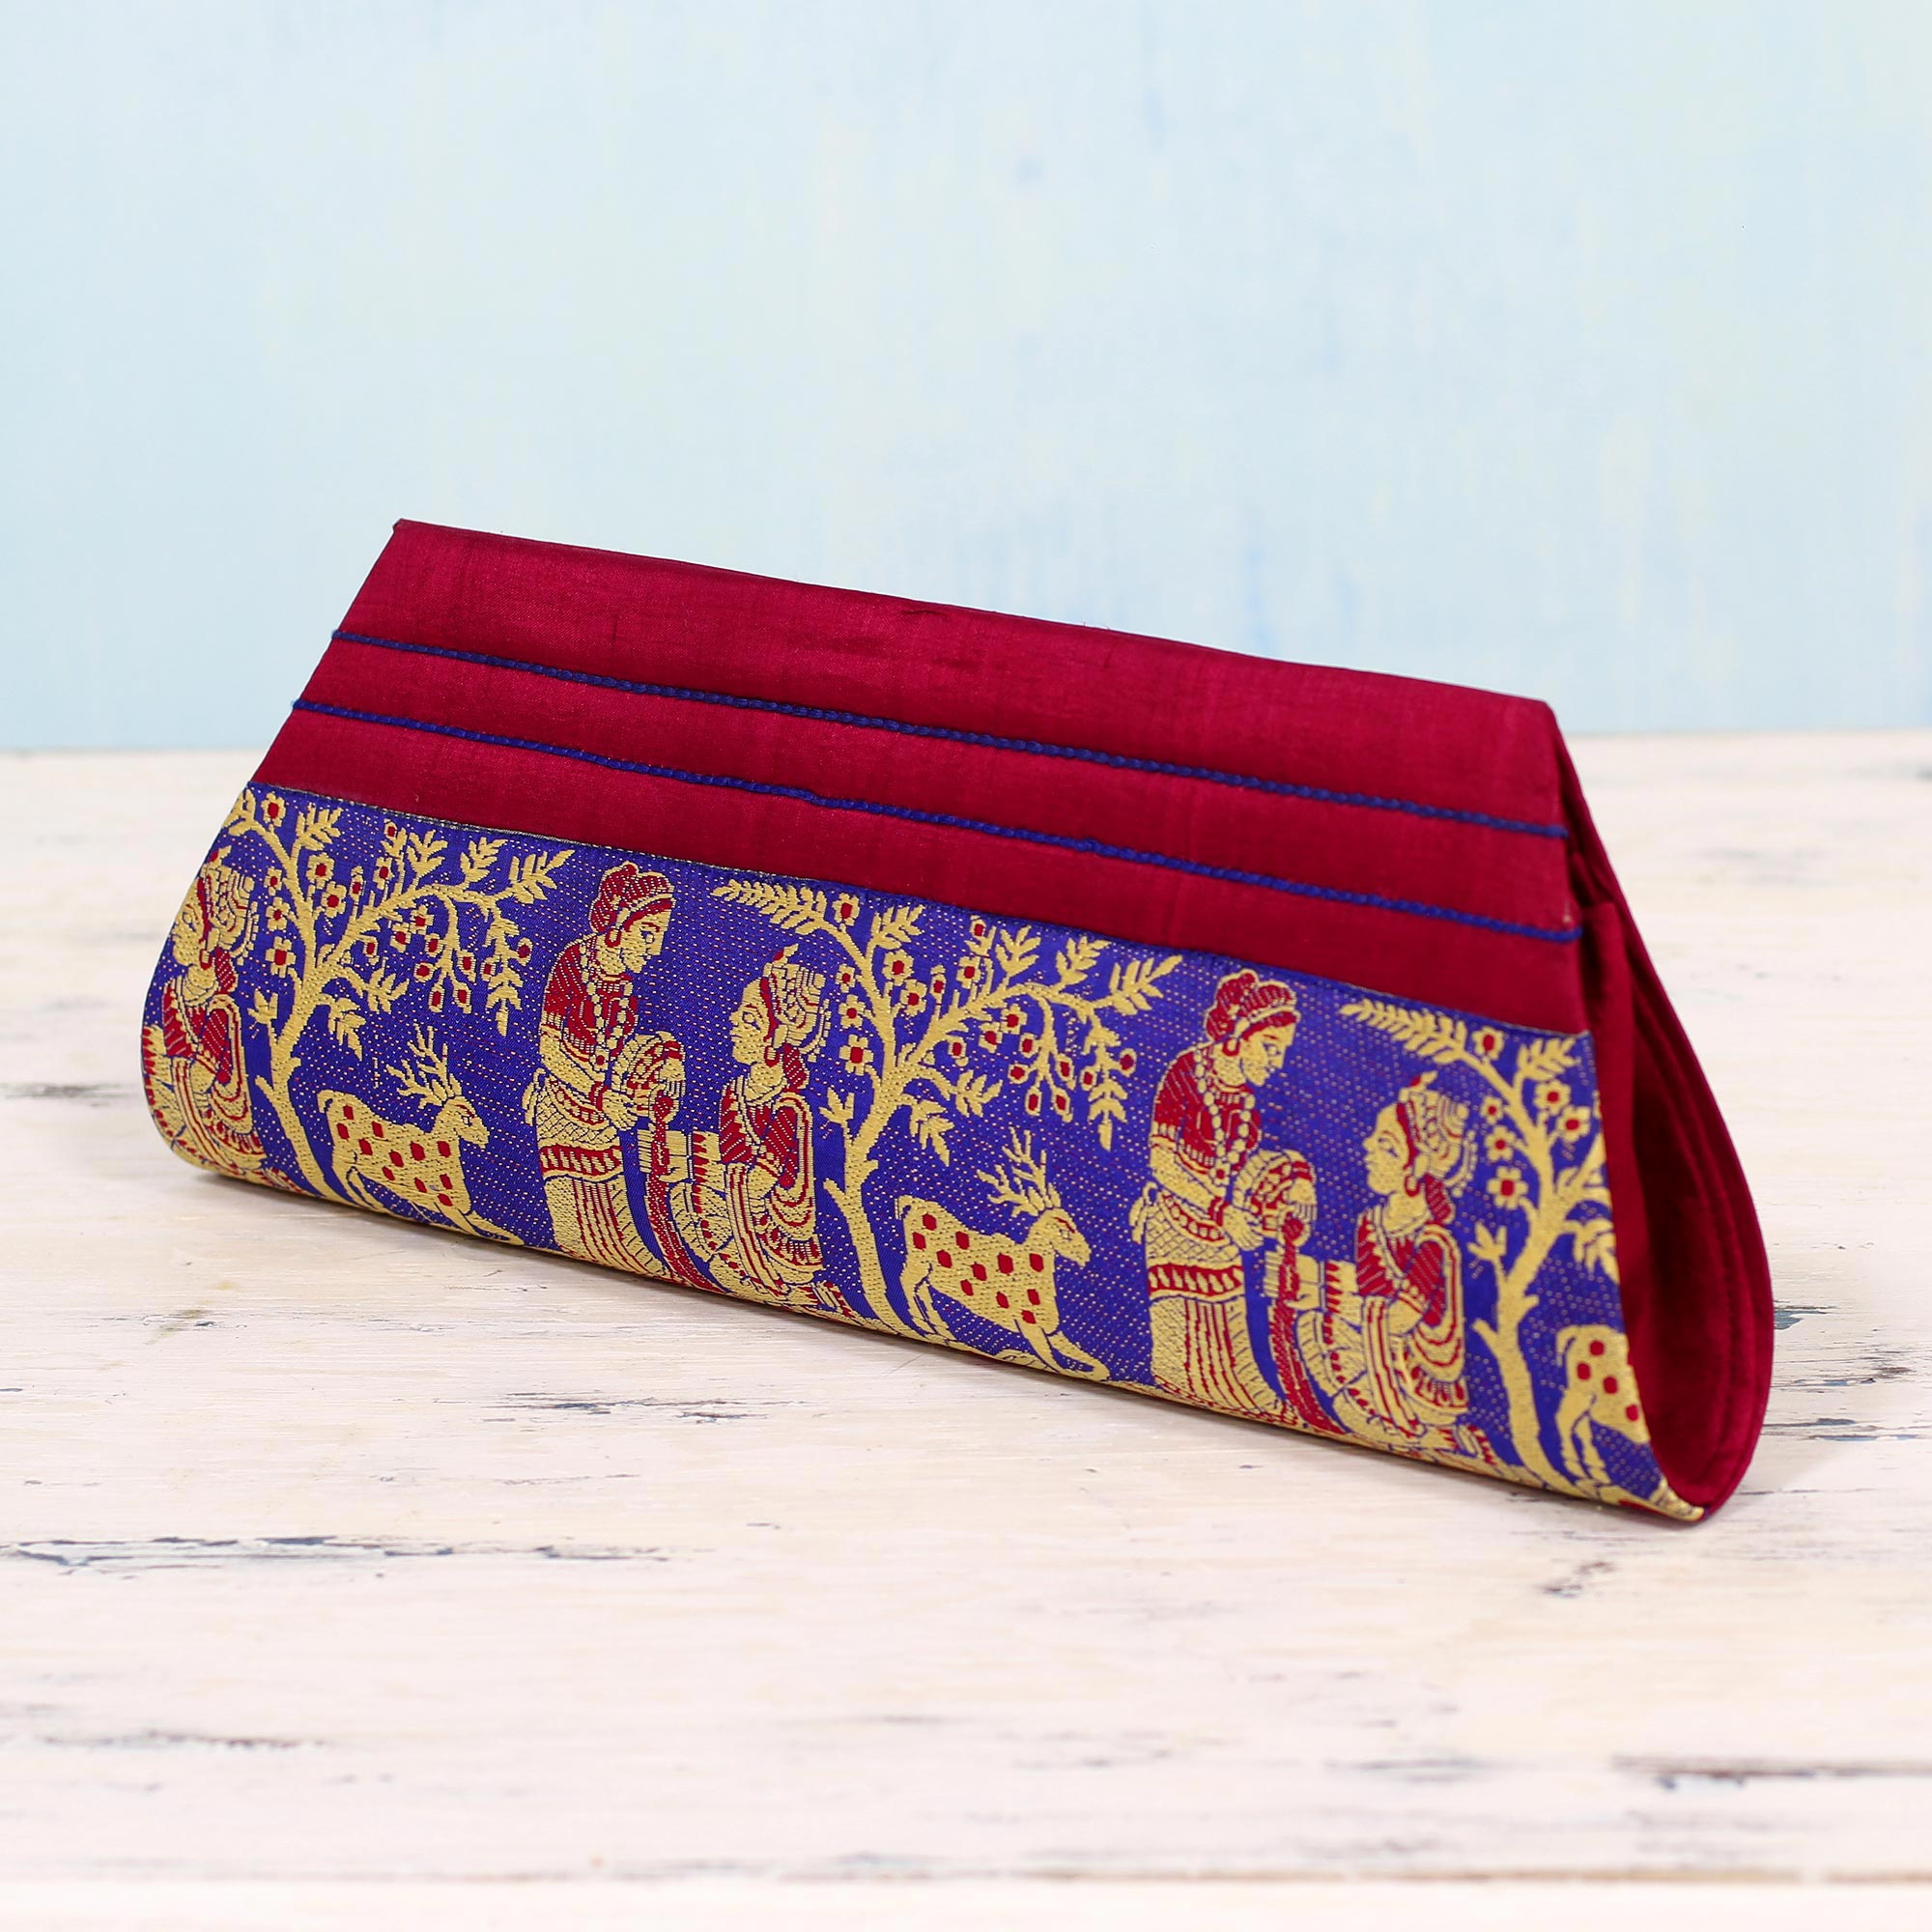 INDHA Clutch Purse in Red and Green Silk Brocade | Eco-Fashion |  Handcrafted Silk Clutch | Block-printed Clutch | Fashion Utility |  Accessory | Eco-friendly product - Curated online shop for handcrafted